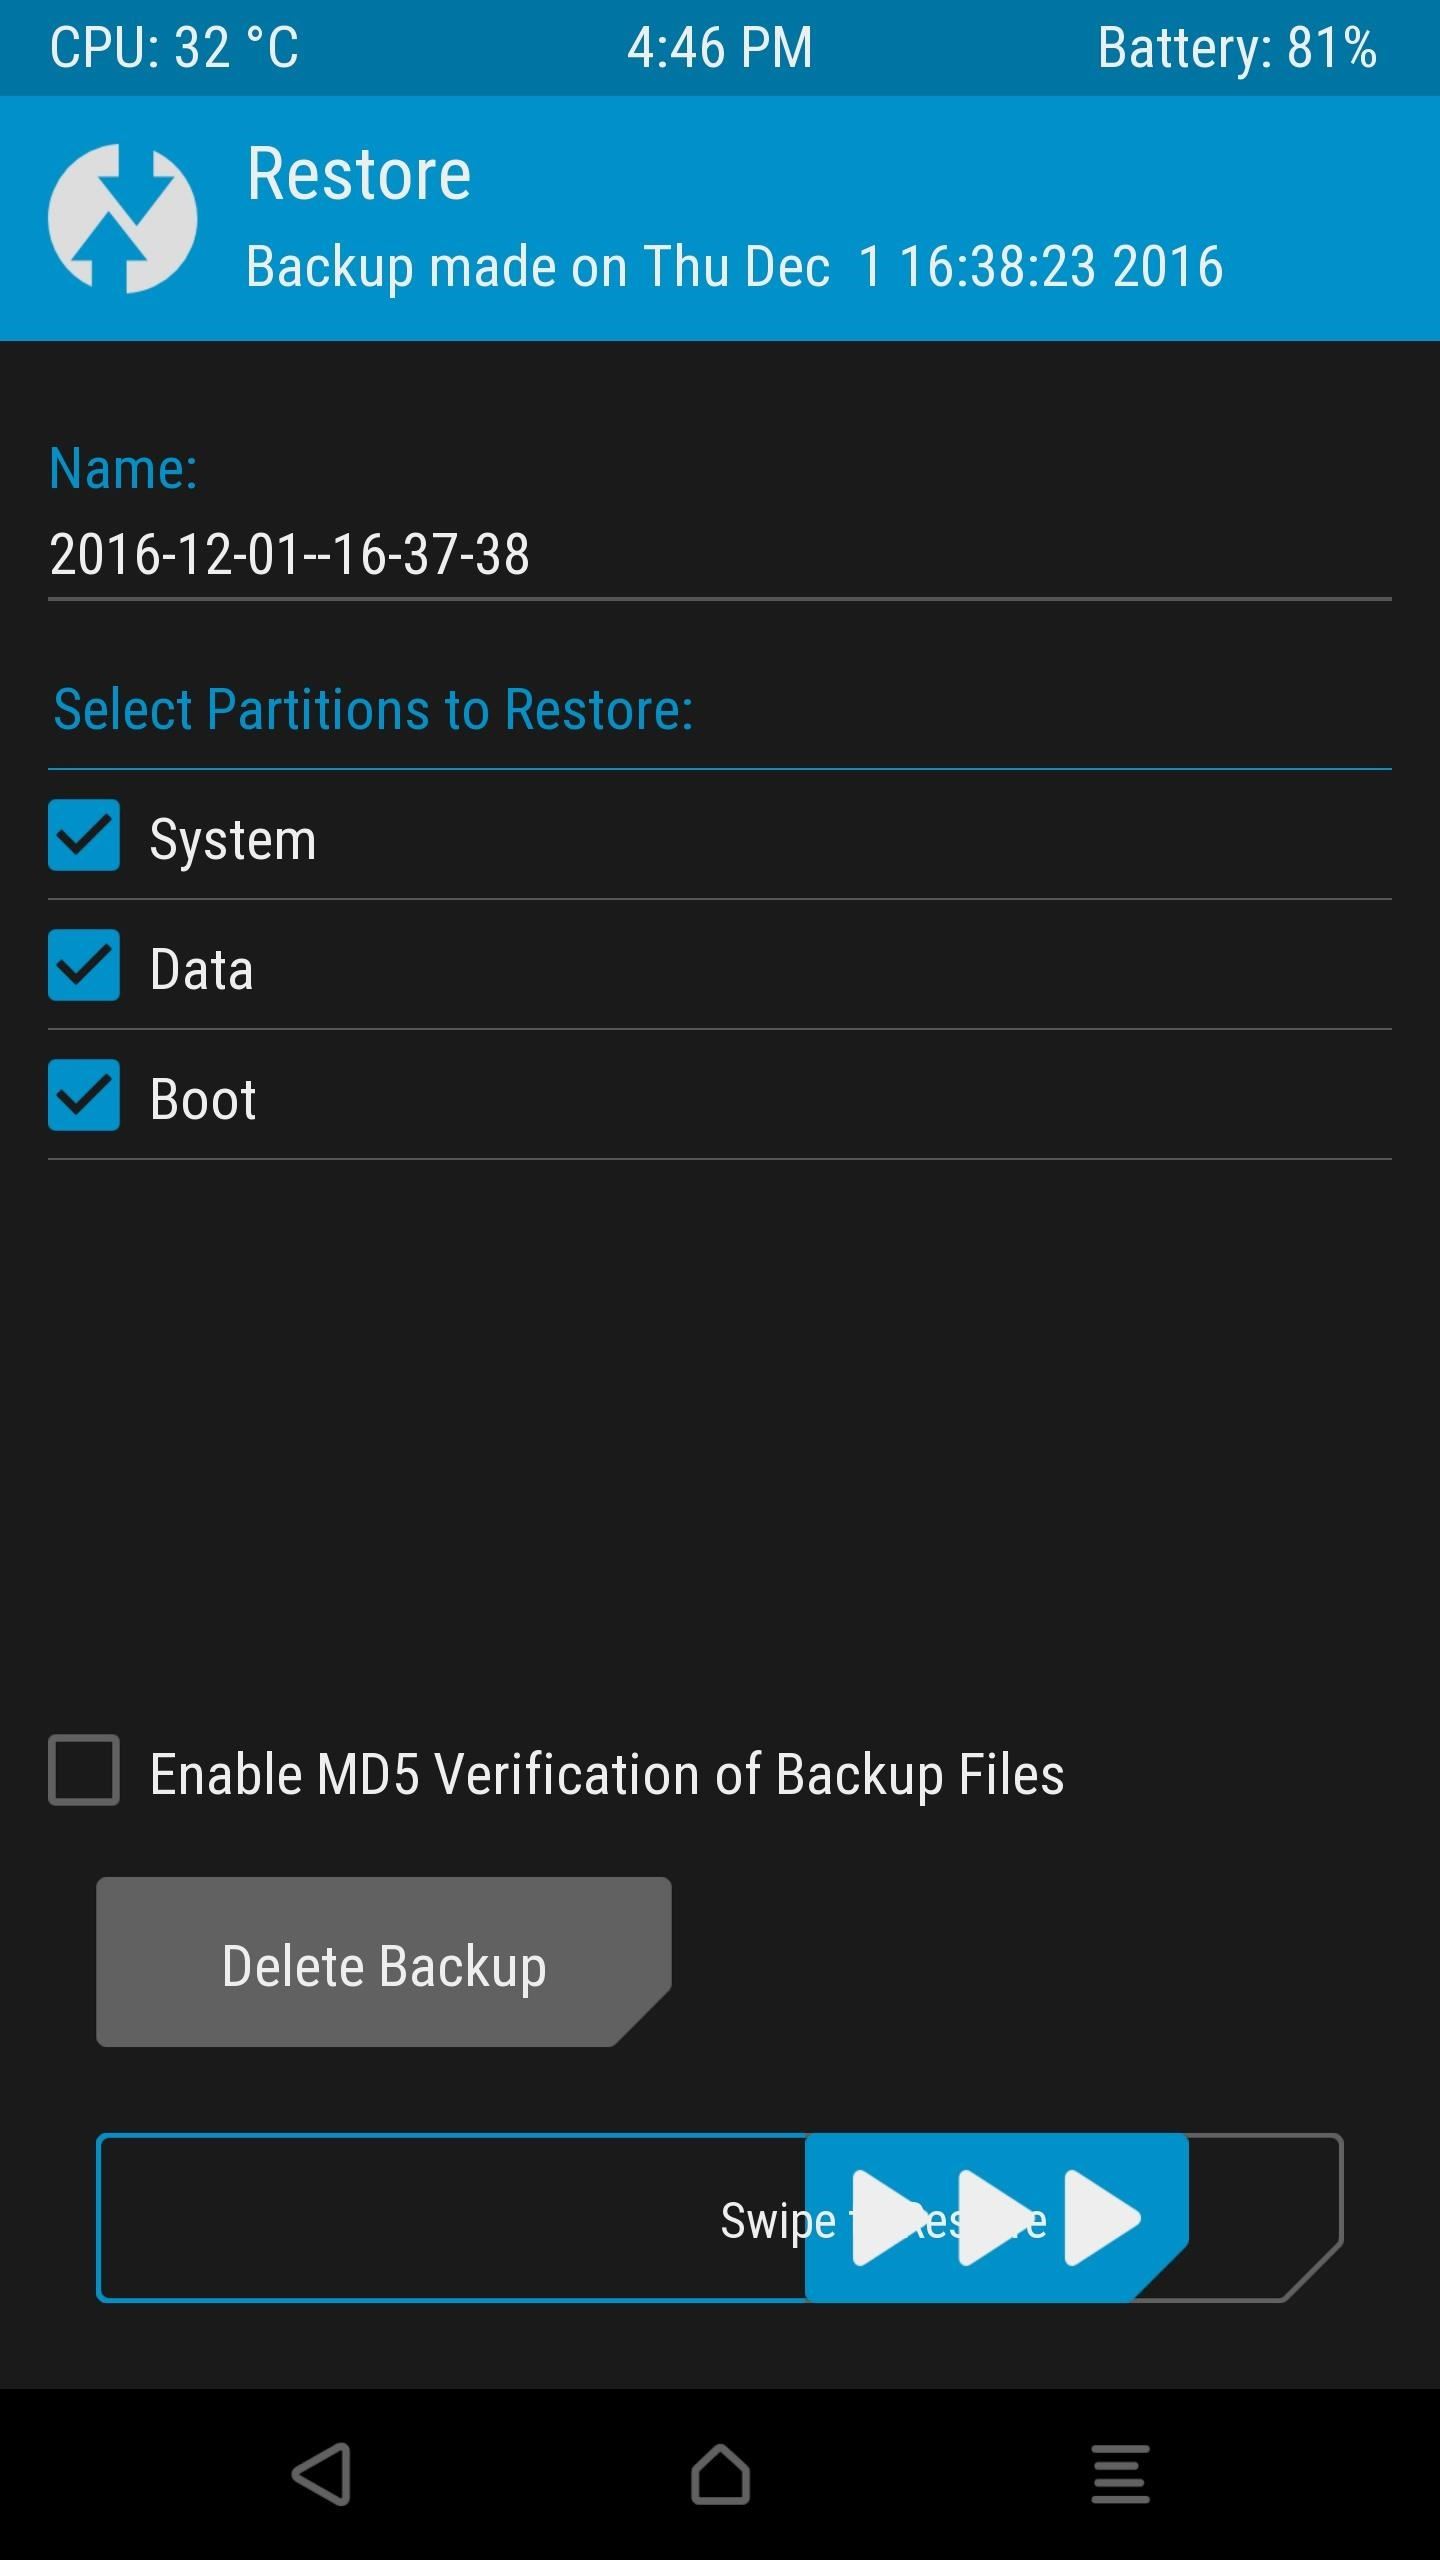 TWRP 101: How to Make a NANDroid Backup & Restore Your Entire Phone